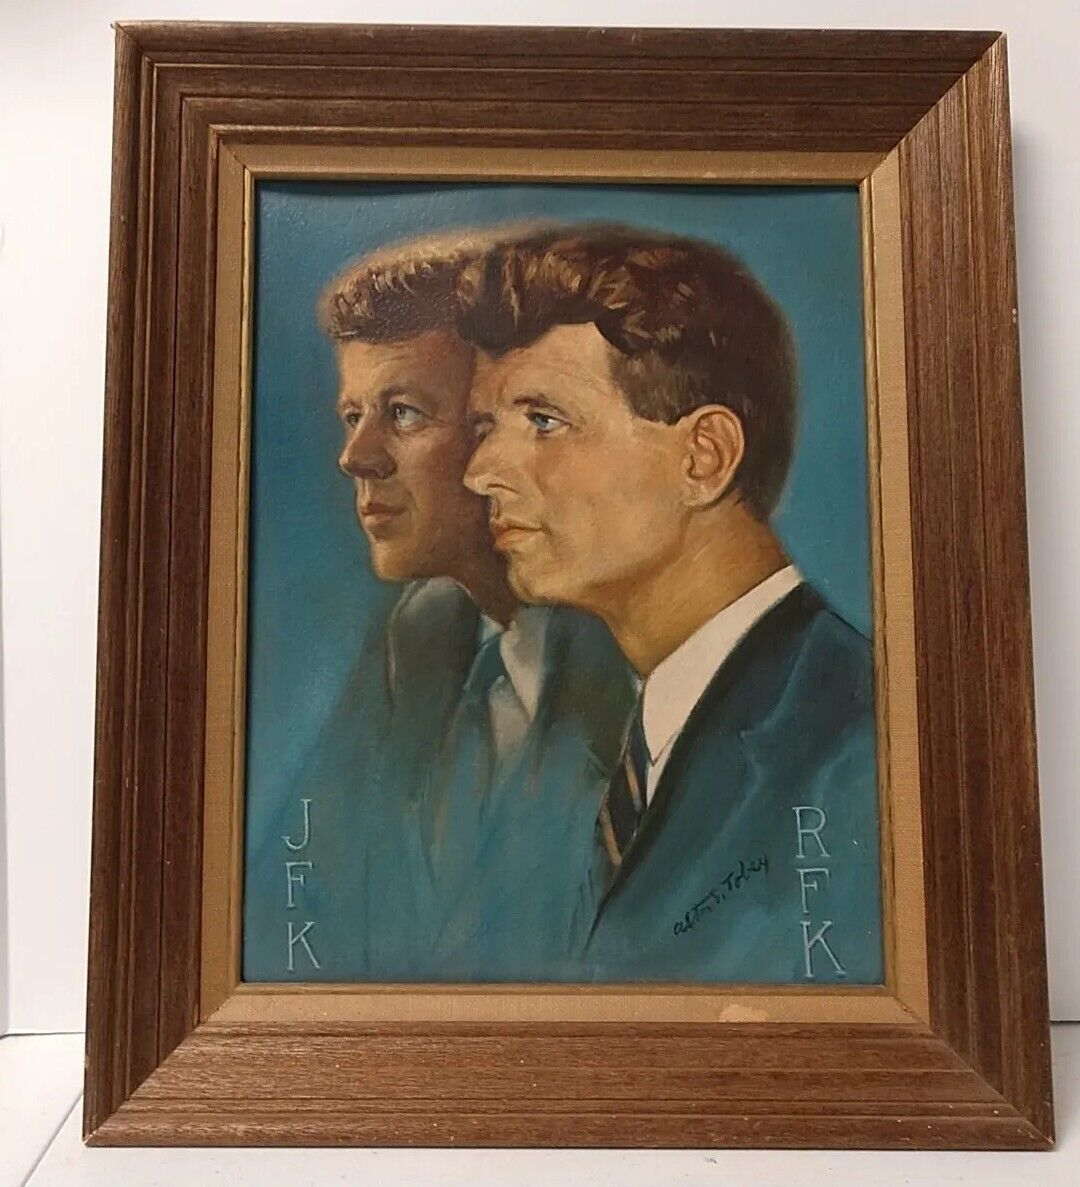 John F. and Robert F Kennedy The Kennedy's Print by Alton Tobey in Frame Vintage